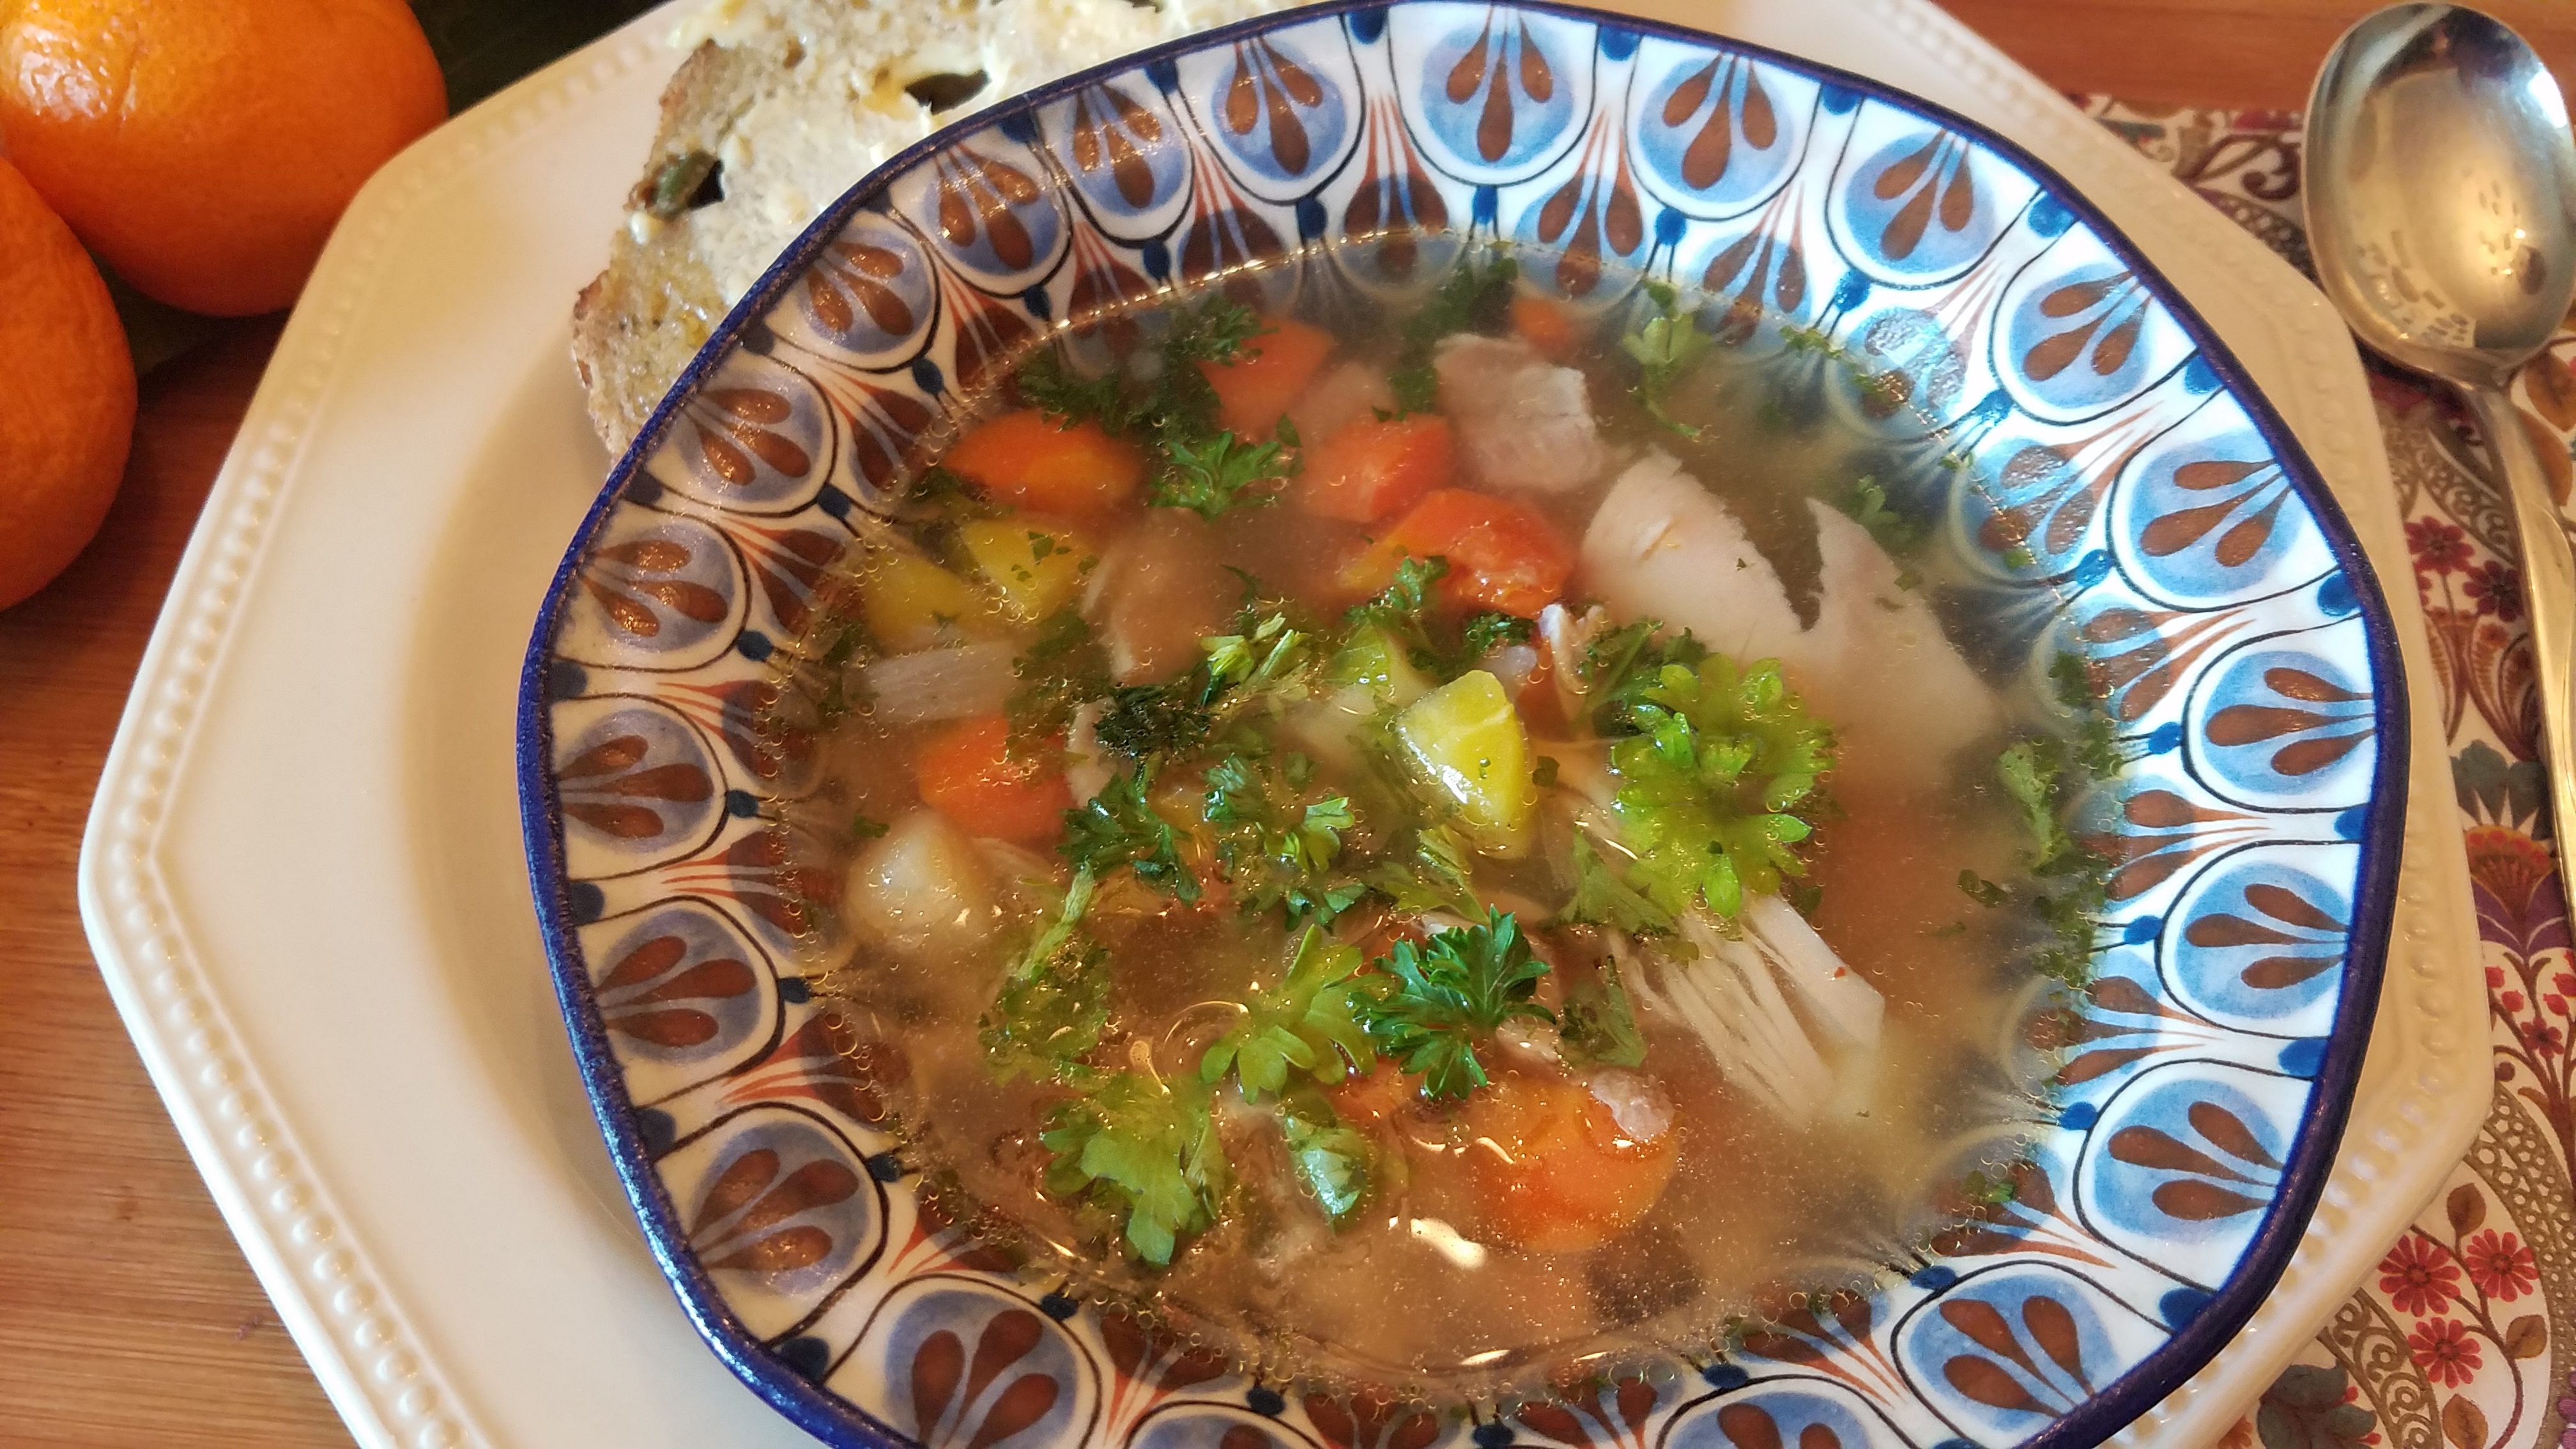 Chicken soup is ‘a hug in a bowl’